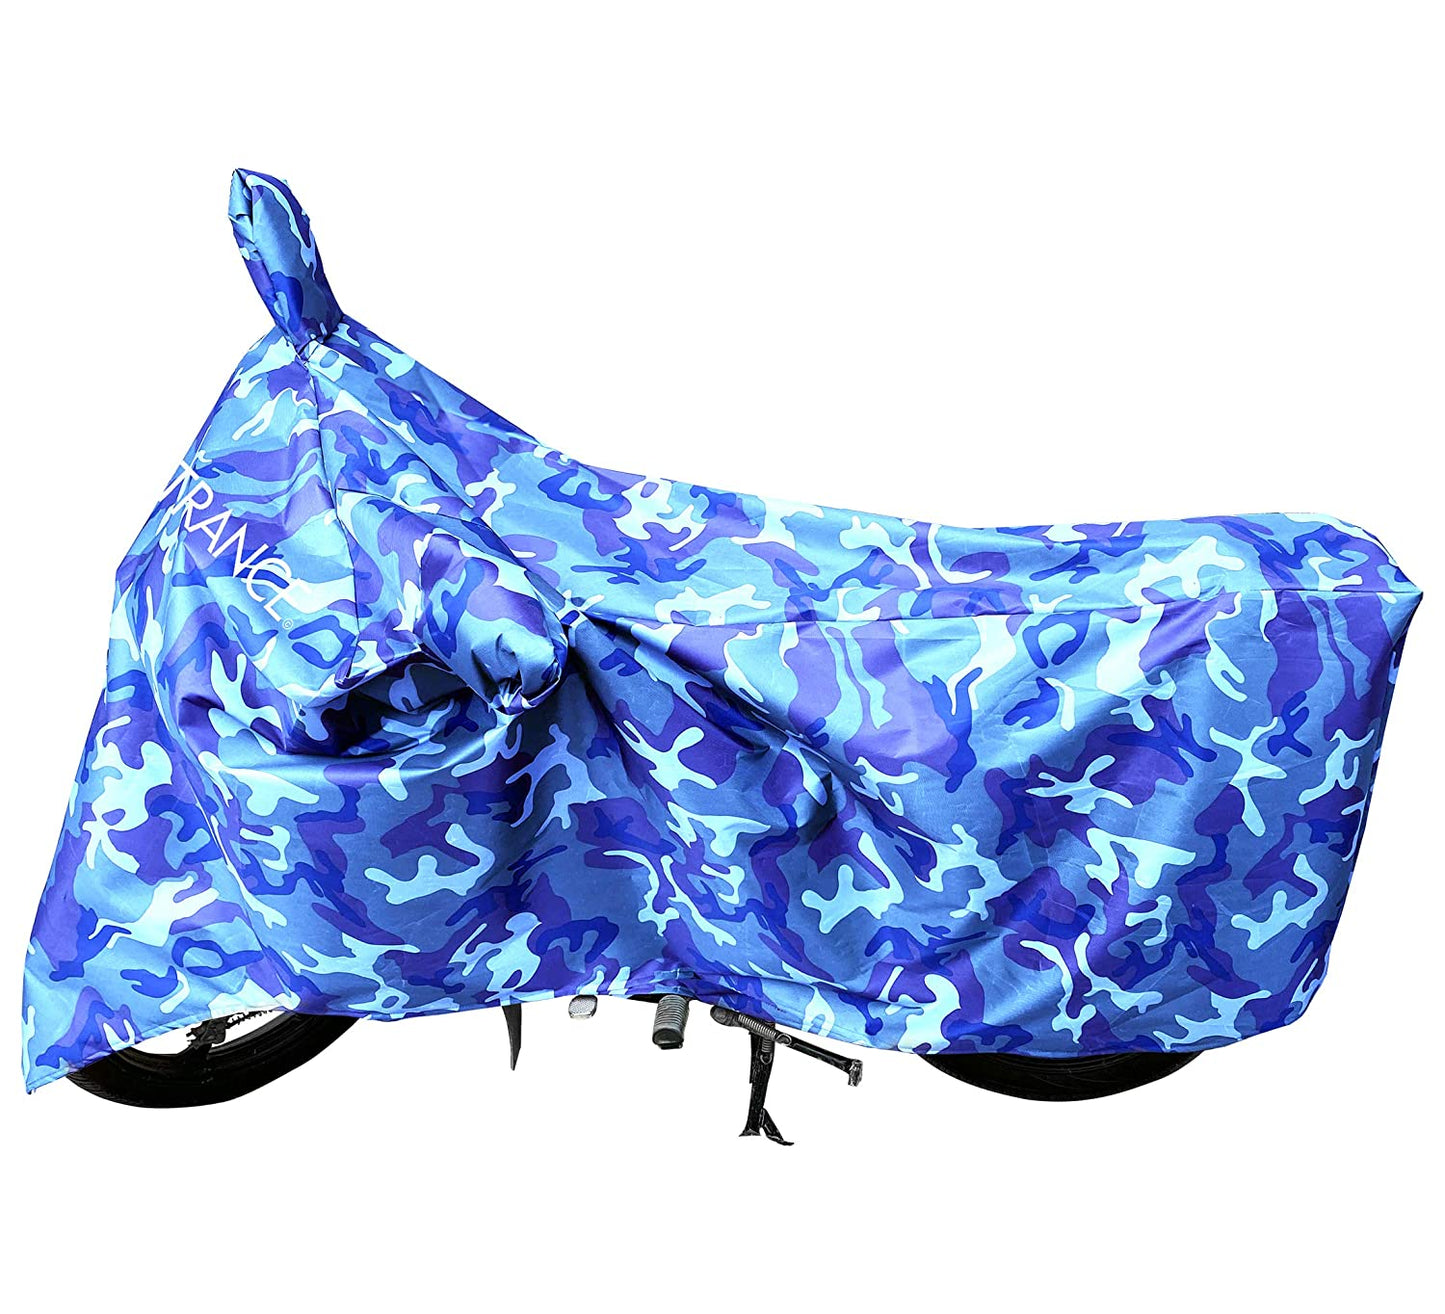 MotoTrance Jungle Bike Body Covers For Honda CB Shine SP - Interlock-Stitched Waterproof and Heat Resistant with Mirror Pockets